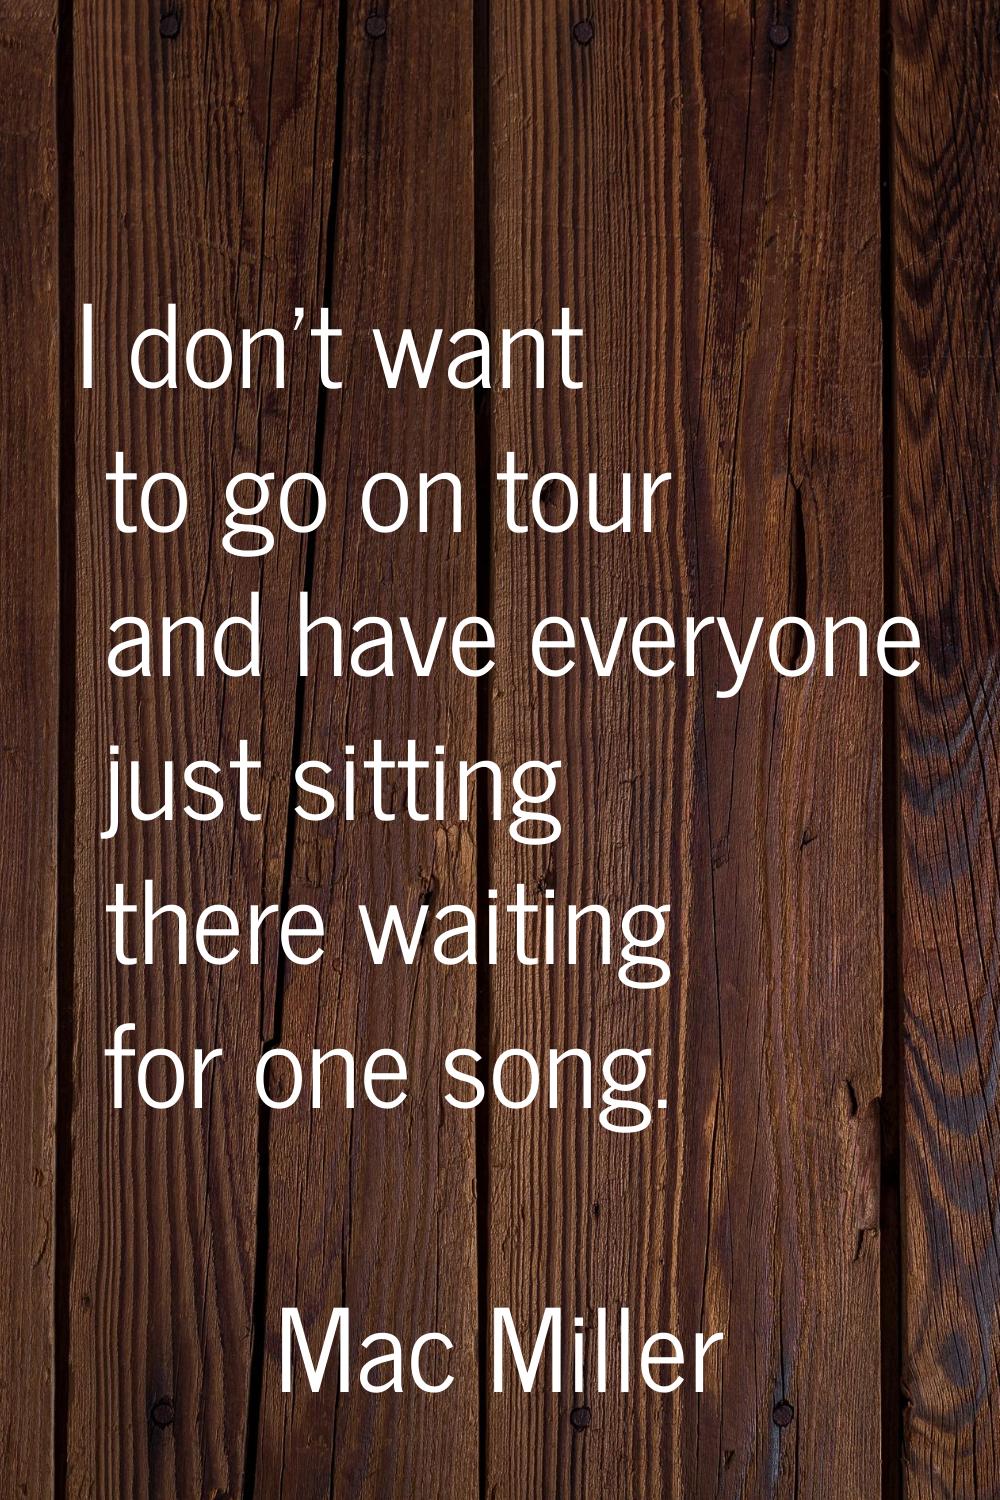 I don't want to go on tour and have everyone just sitting there waiting for one song.